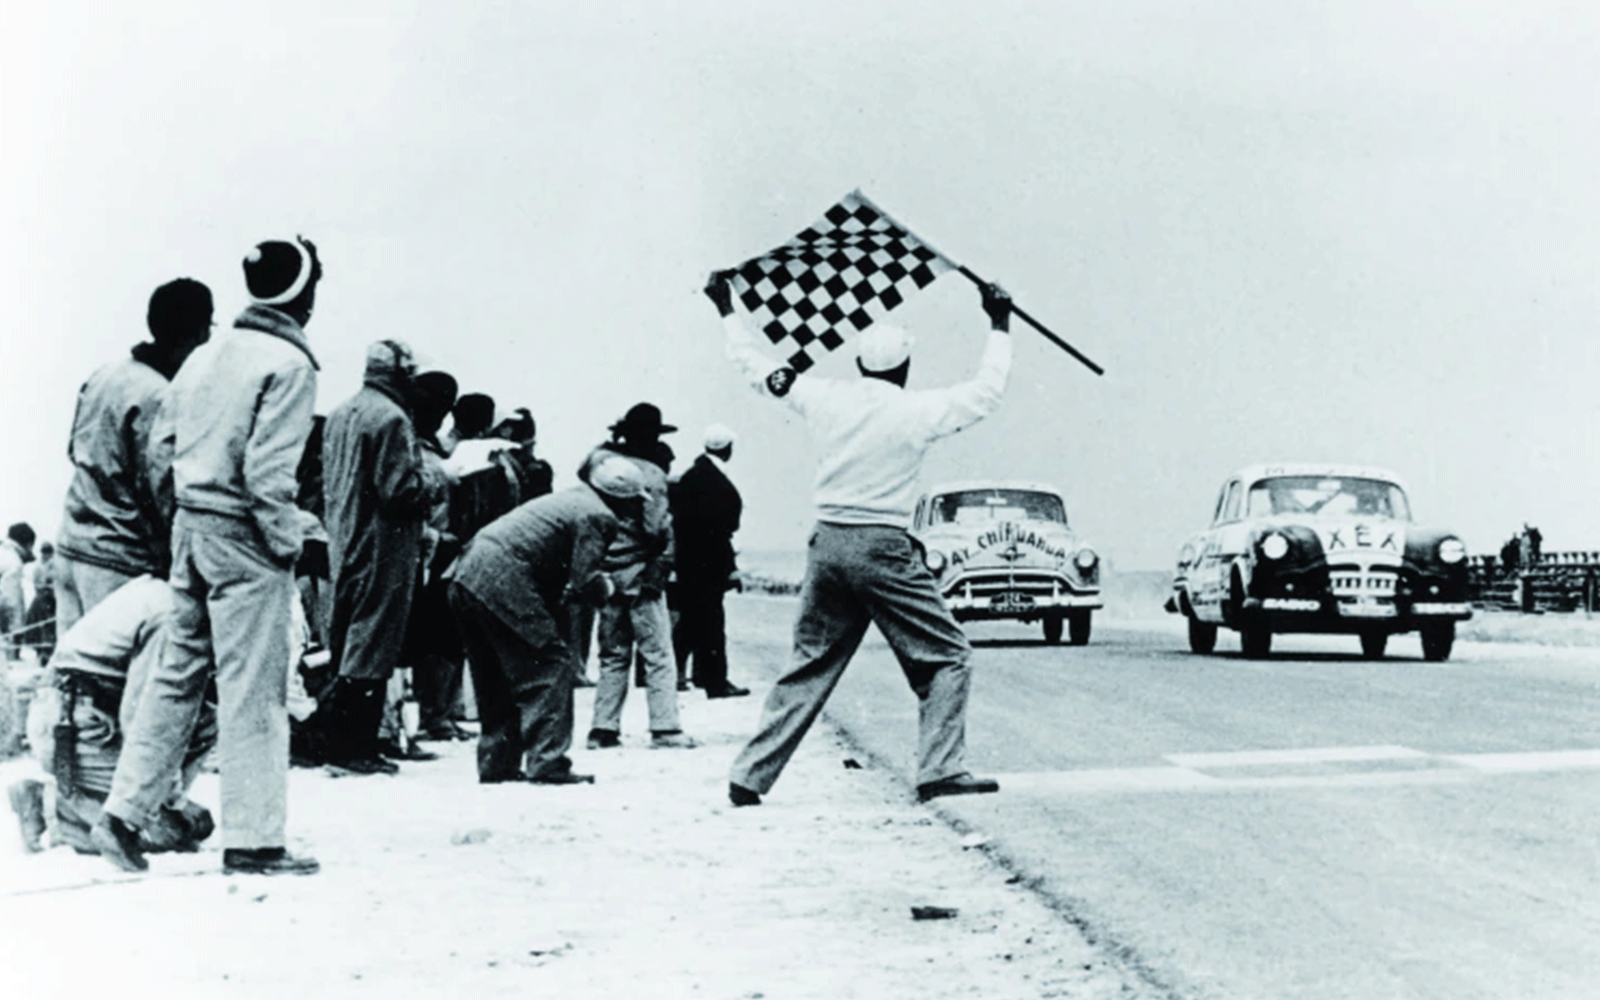 Carrera Panamericana - TAG Heuer is a proud partner of the Carrera Panamericana, a legendary, if not the most dangerous race. It was first held in 1950 but was discontinued in 1955, and only to be revived in 1988. Jack Heuer paid tribute to the race in 1963 by naming one of his most famous chronographs the Carrera.